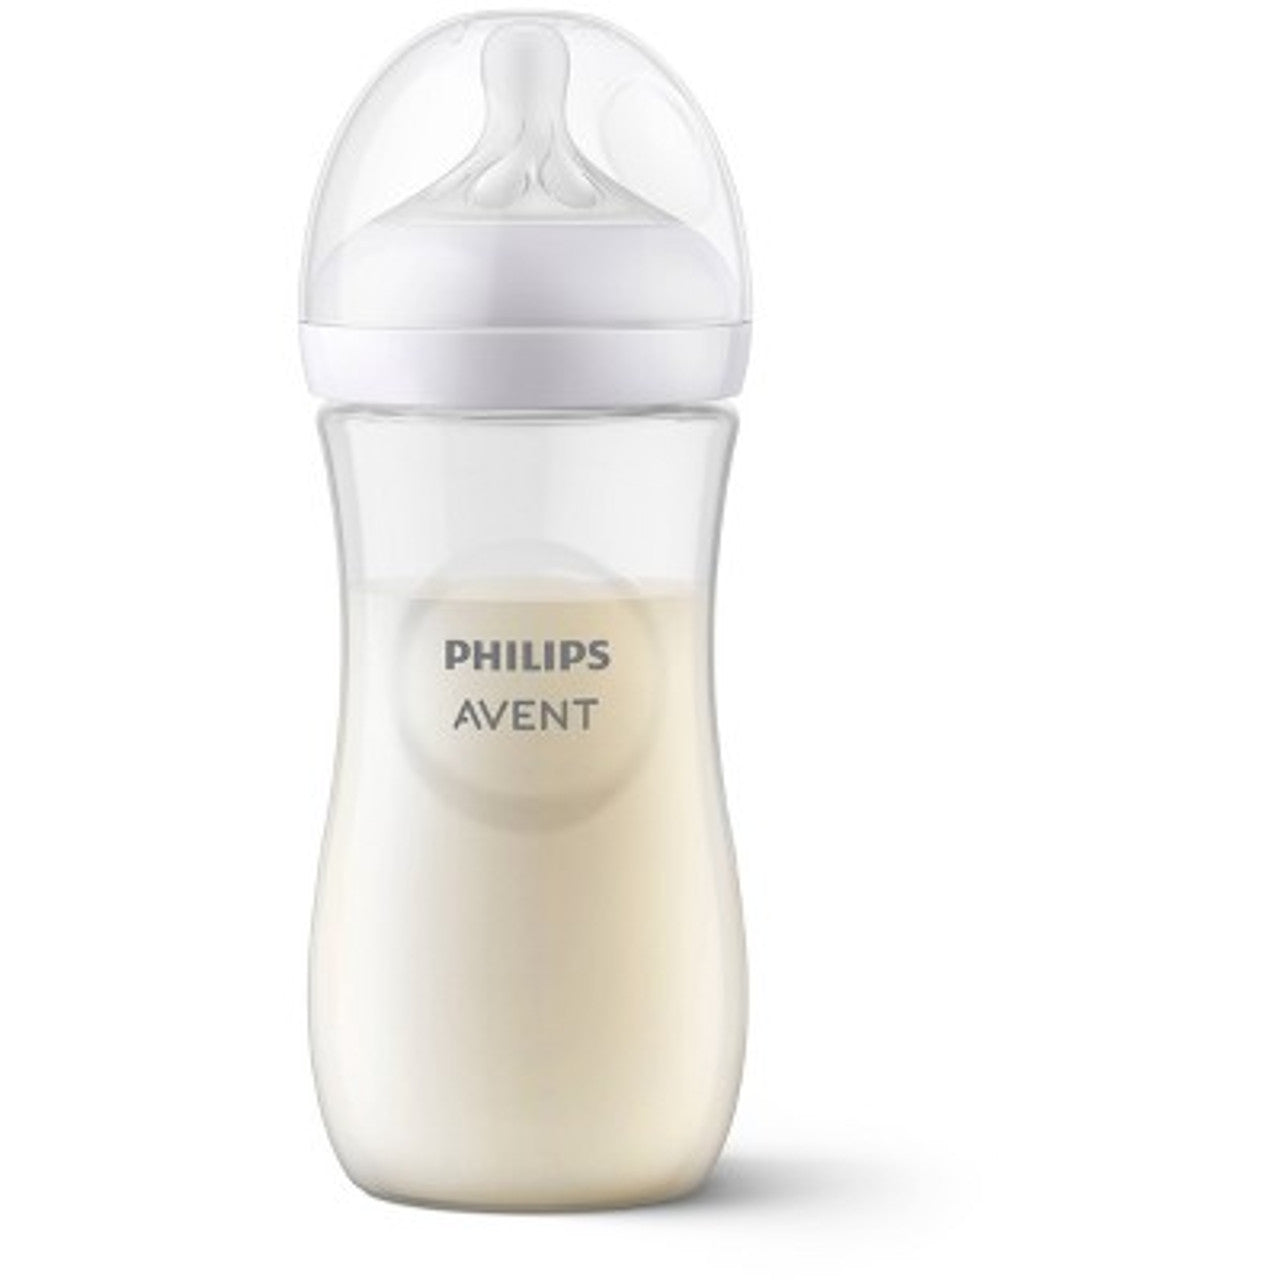 New - Philips Avent Natural Baby Bottle with Natural Response Nipple - Clear - 11oz